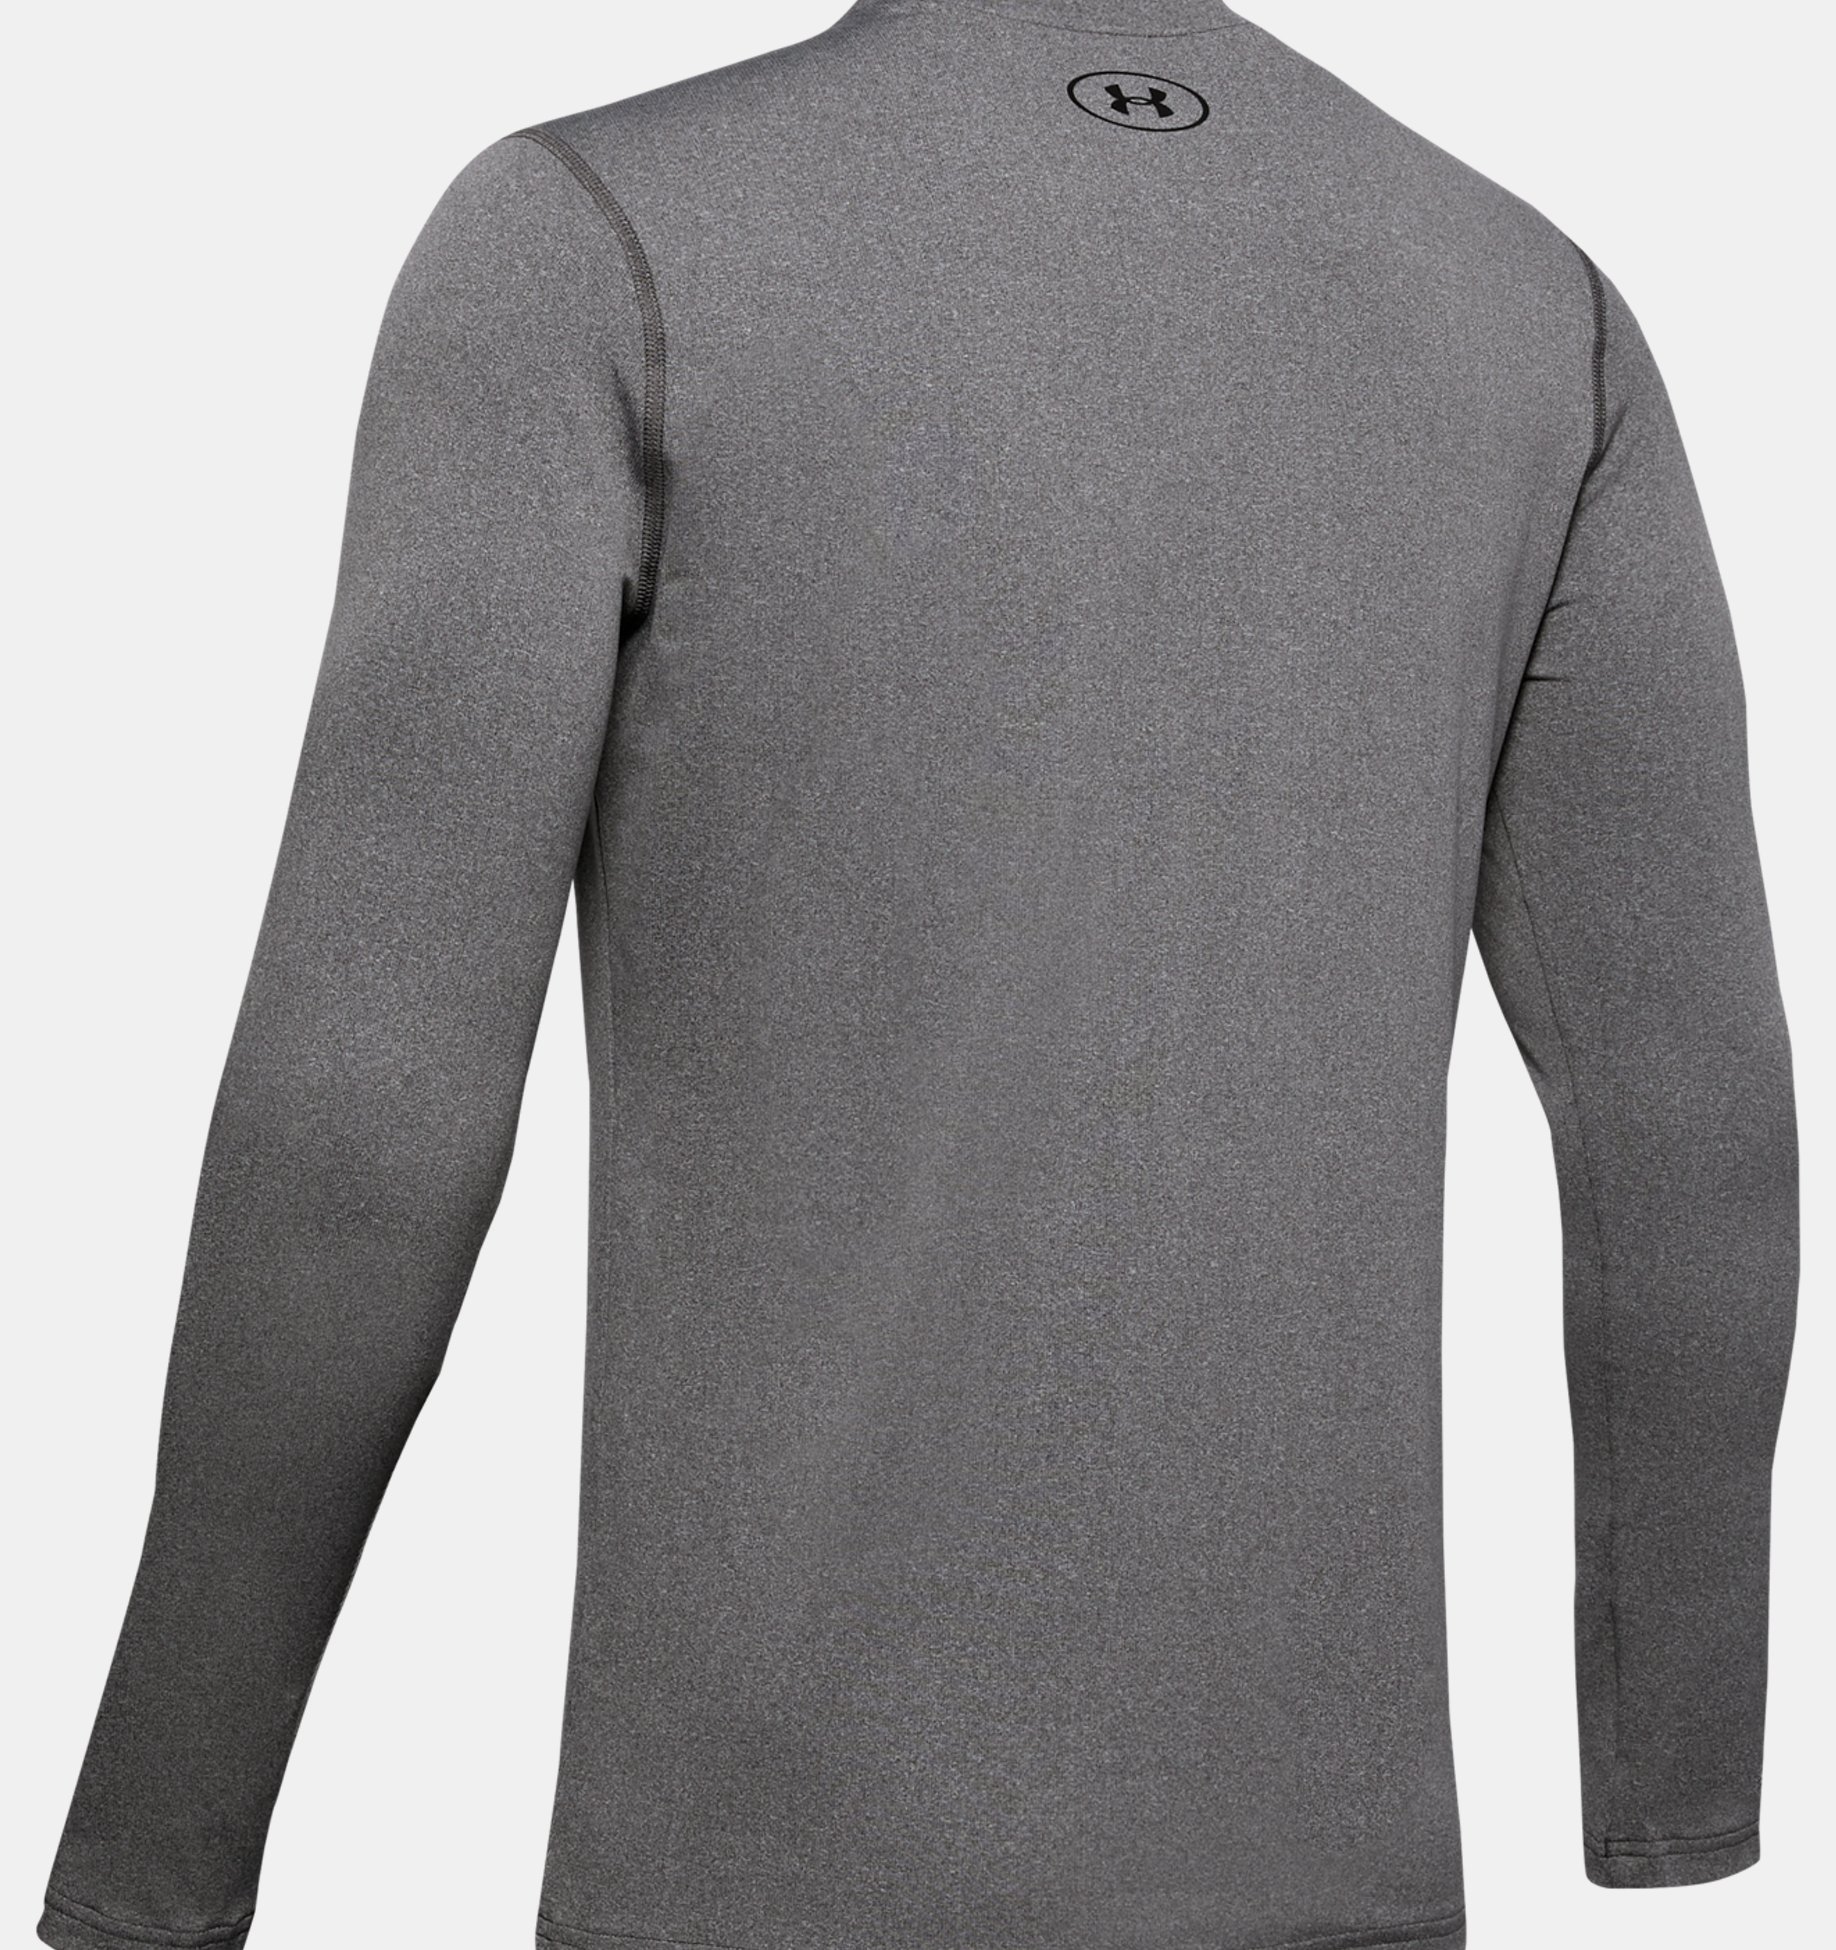 Men's ColdGear® Armour Fitted Mock Long Sleeve | Under Armour